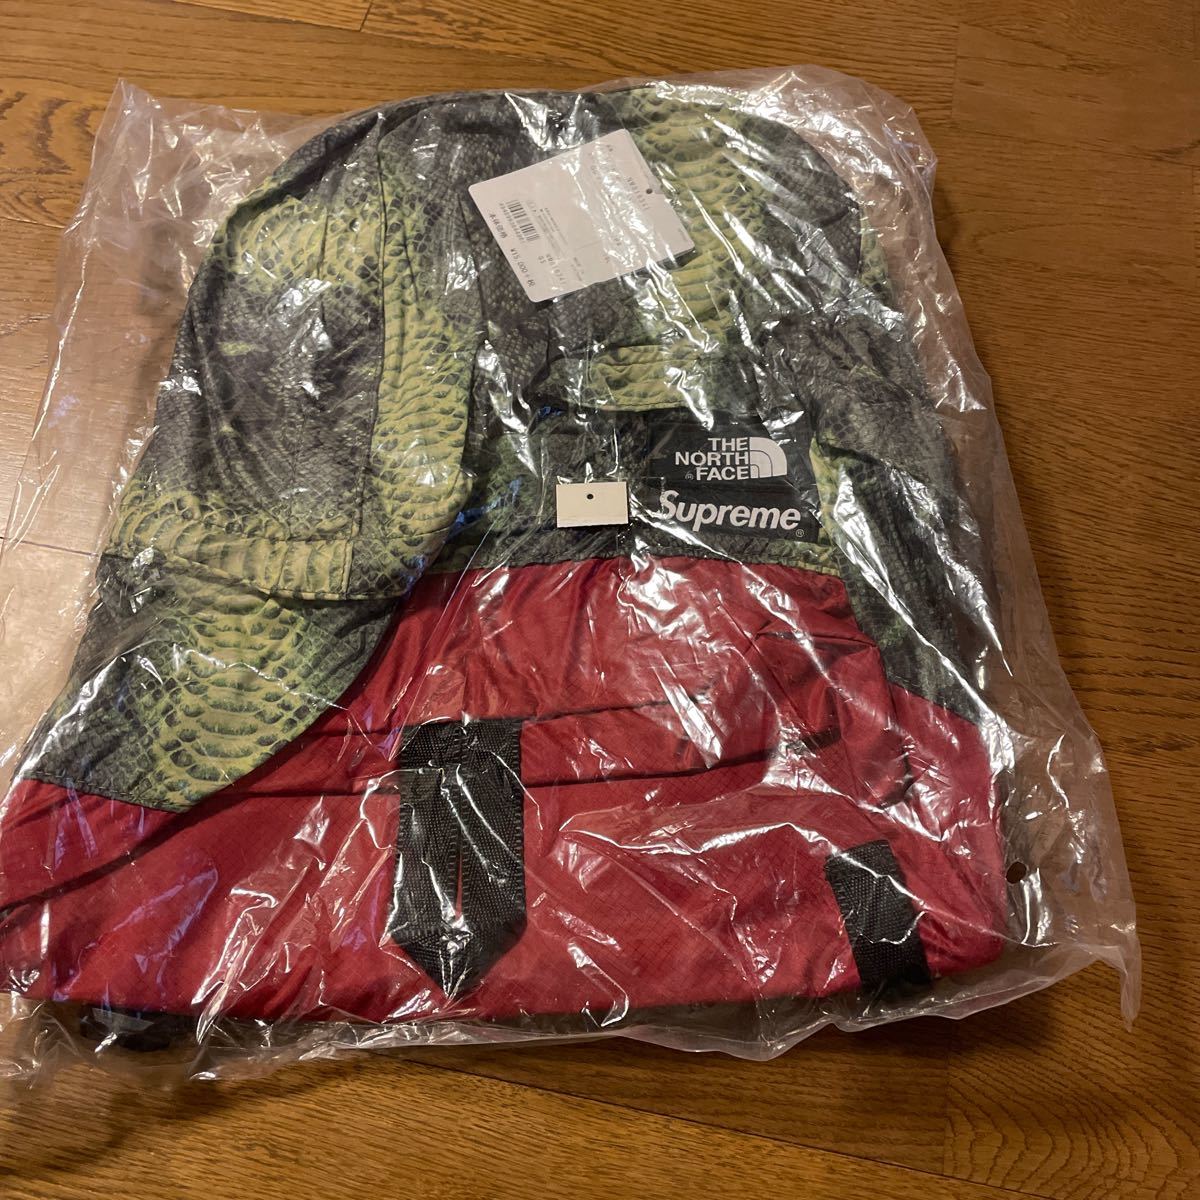 Supreme シュプリーム バッグ THE NORTH FACE パイソン柄 デイパック バックパック リュック Snakeskin Lightweight Day Pack 18SS